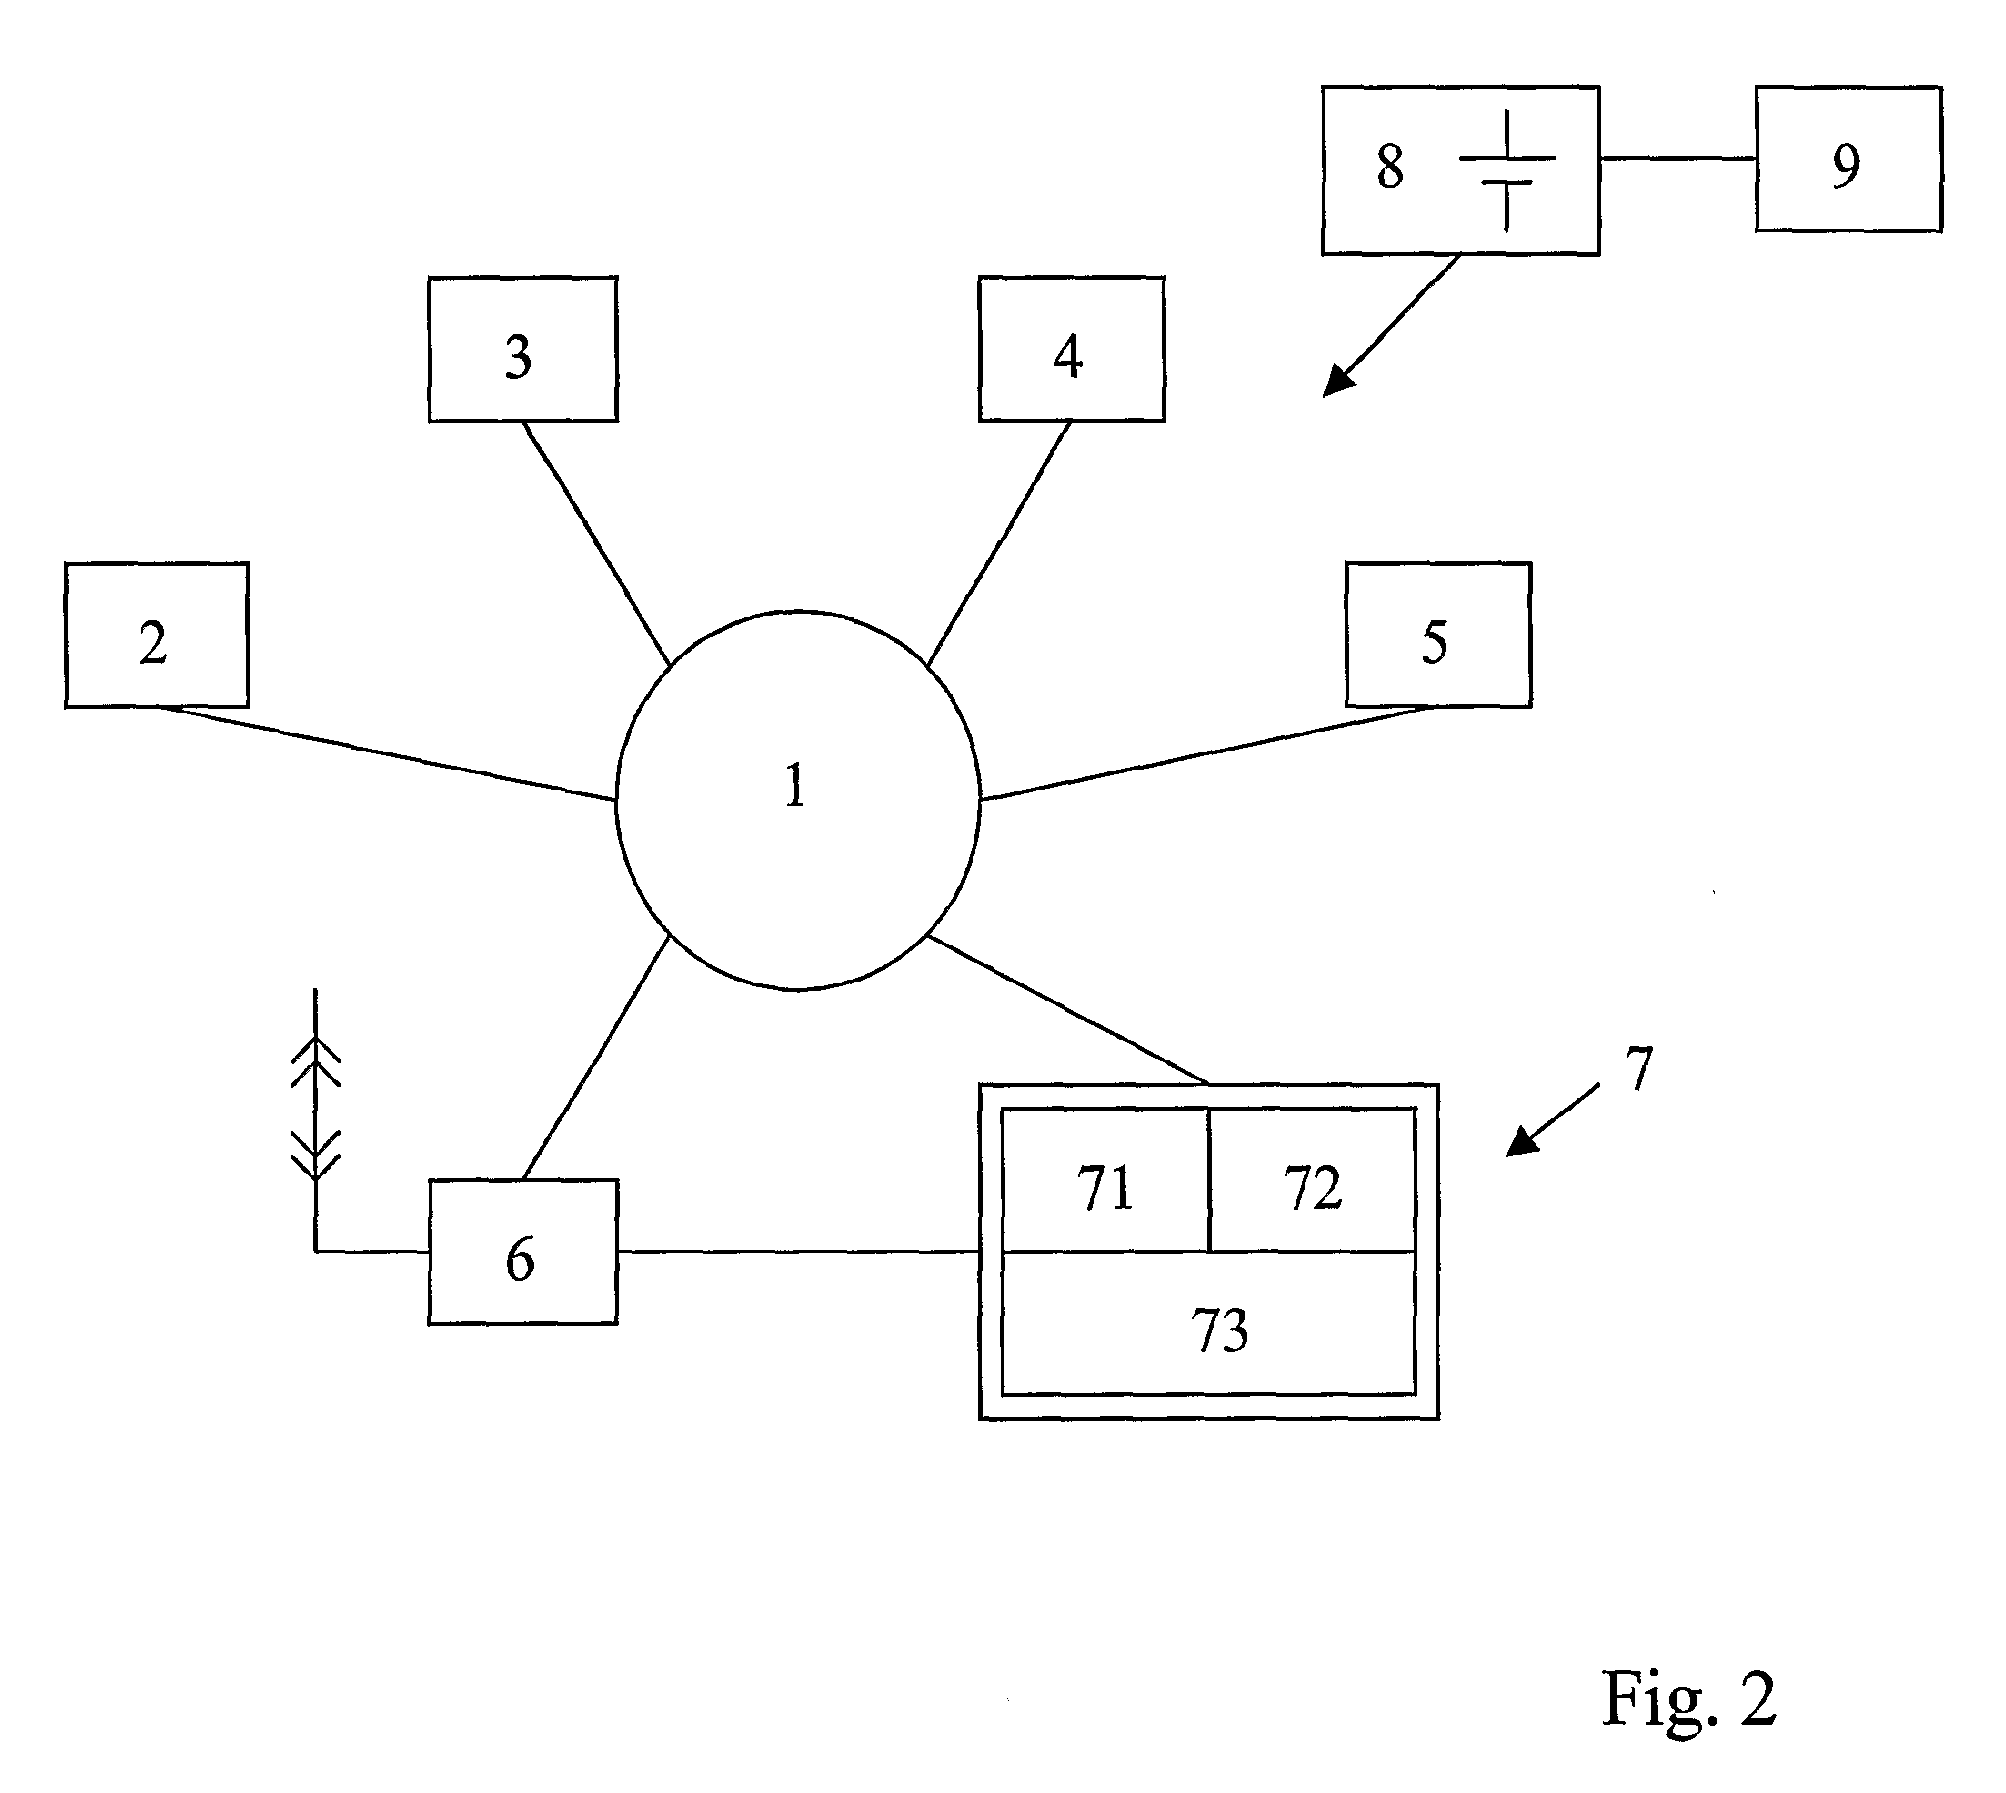 Method for operating a communication system and objects for such a system